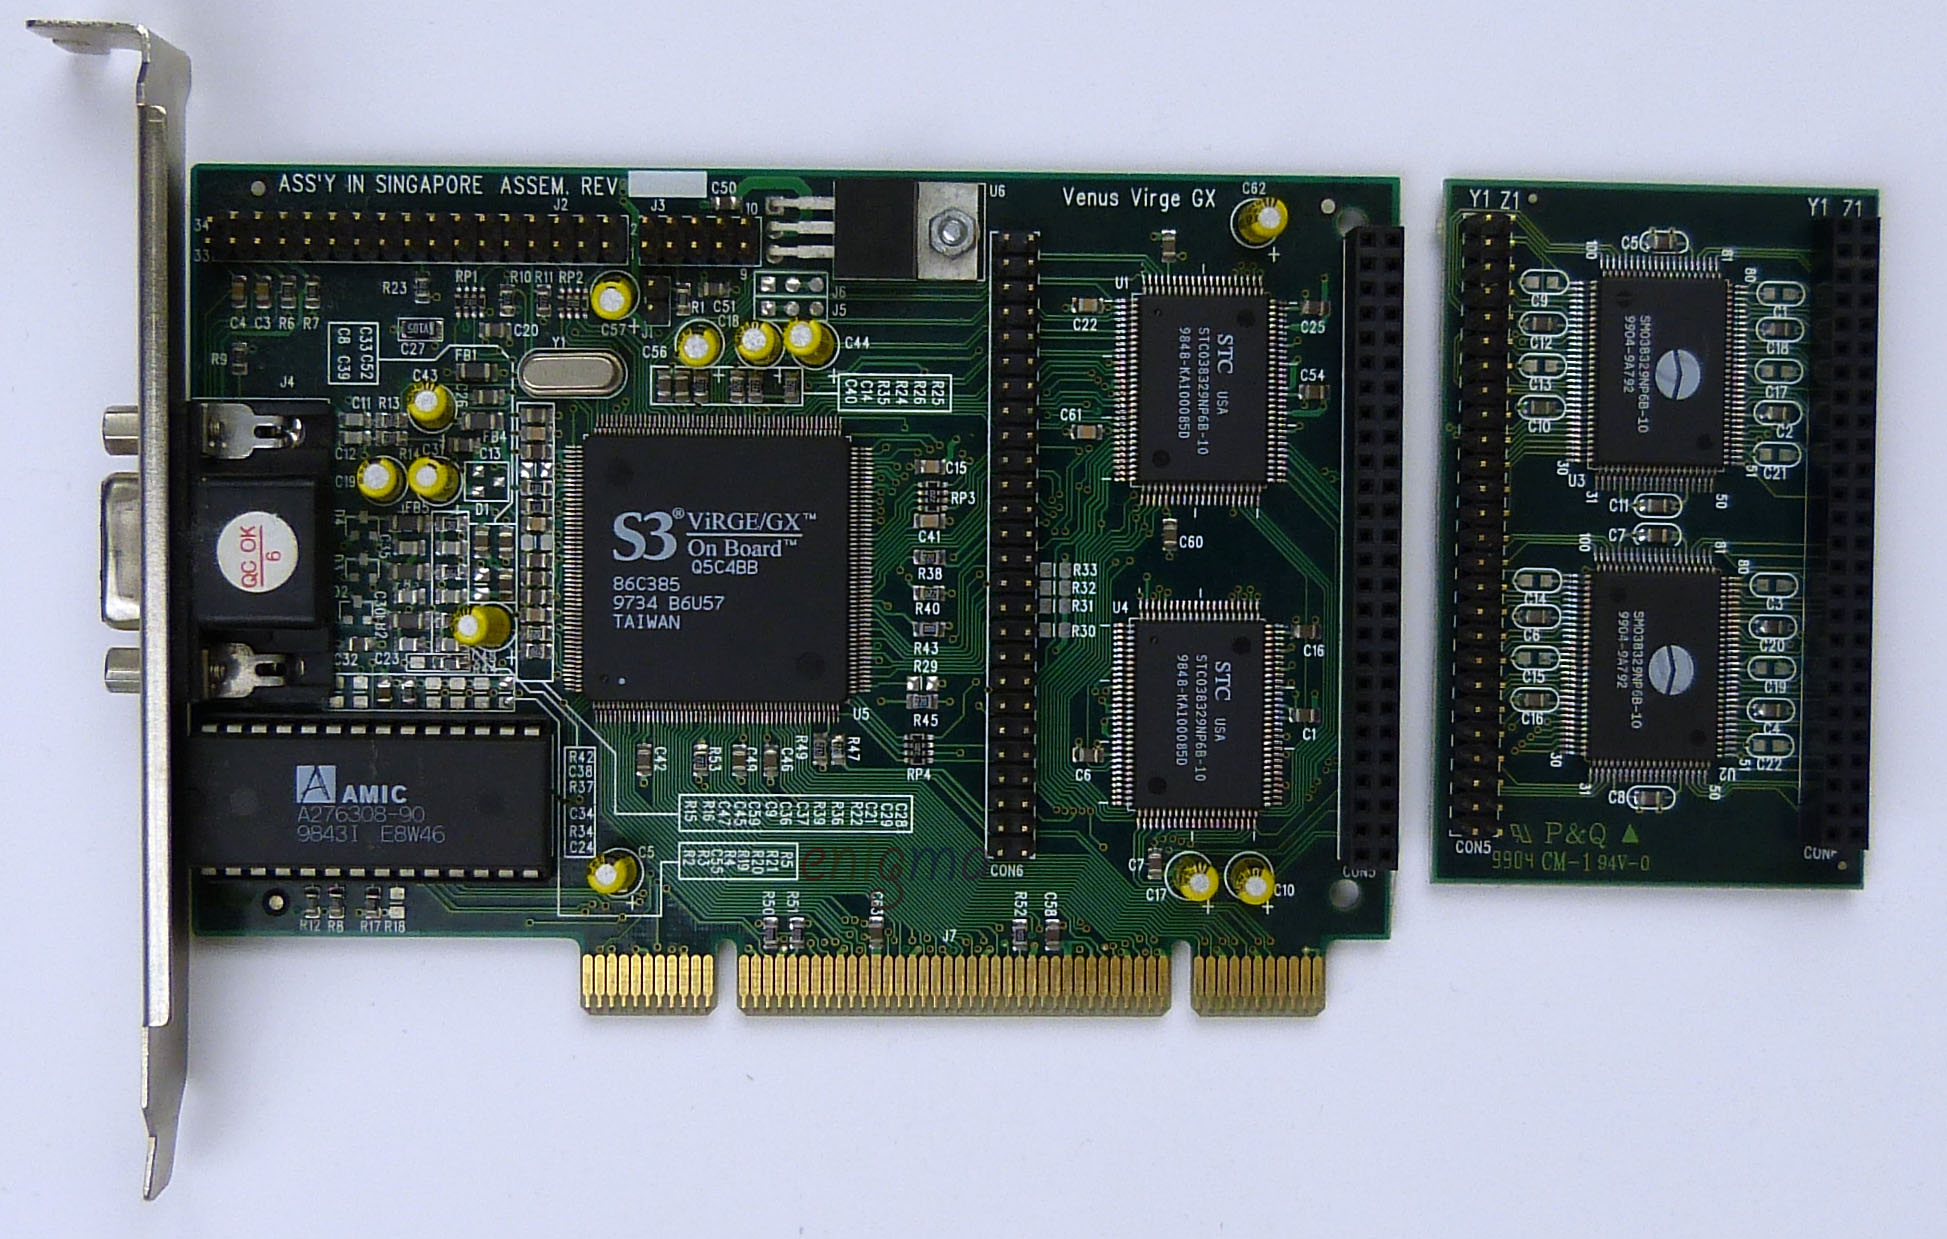 graphics_card_s3_virge_gx_front.jpg